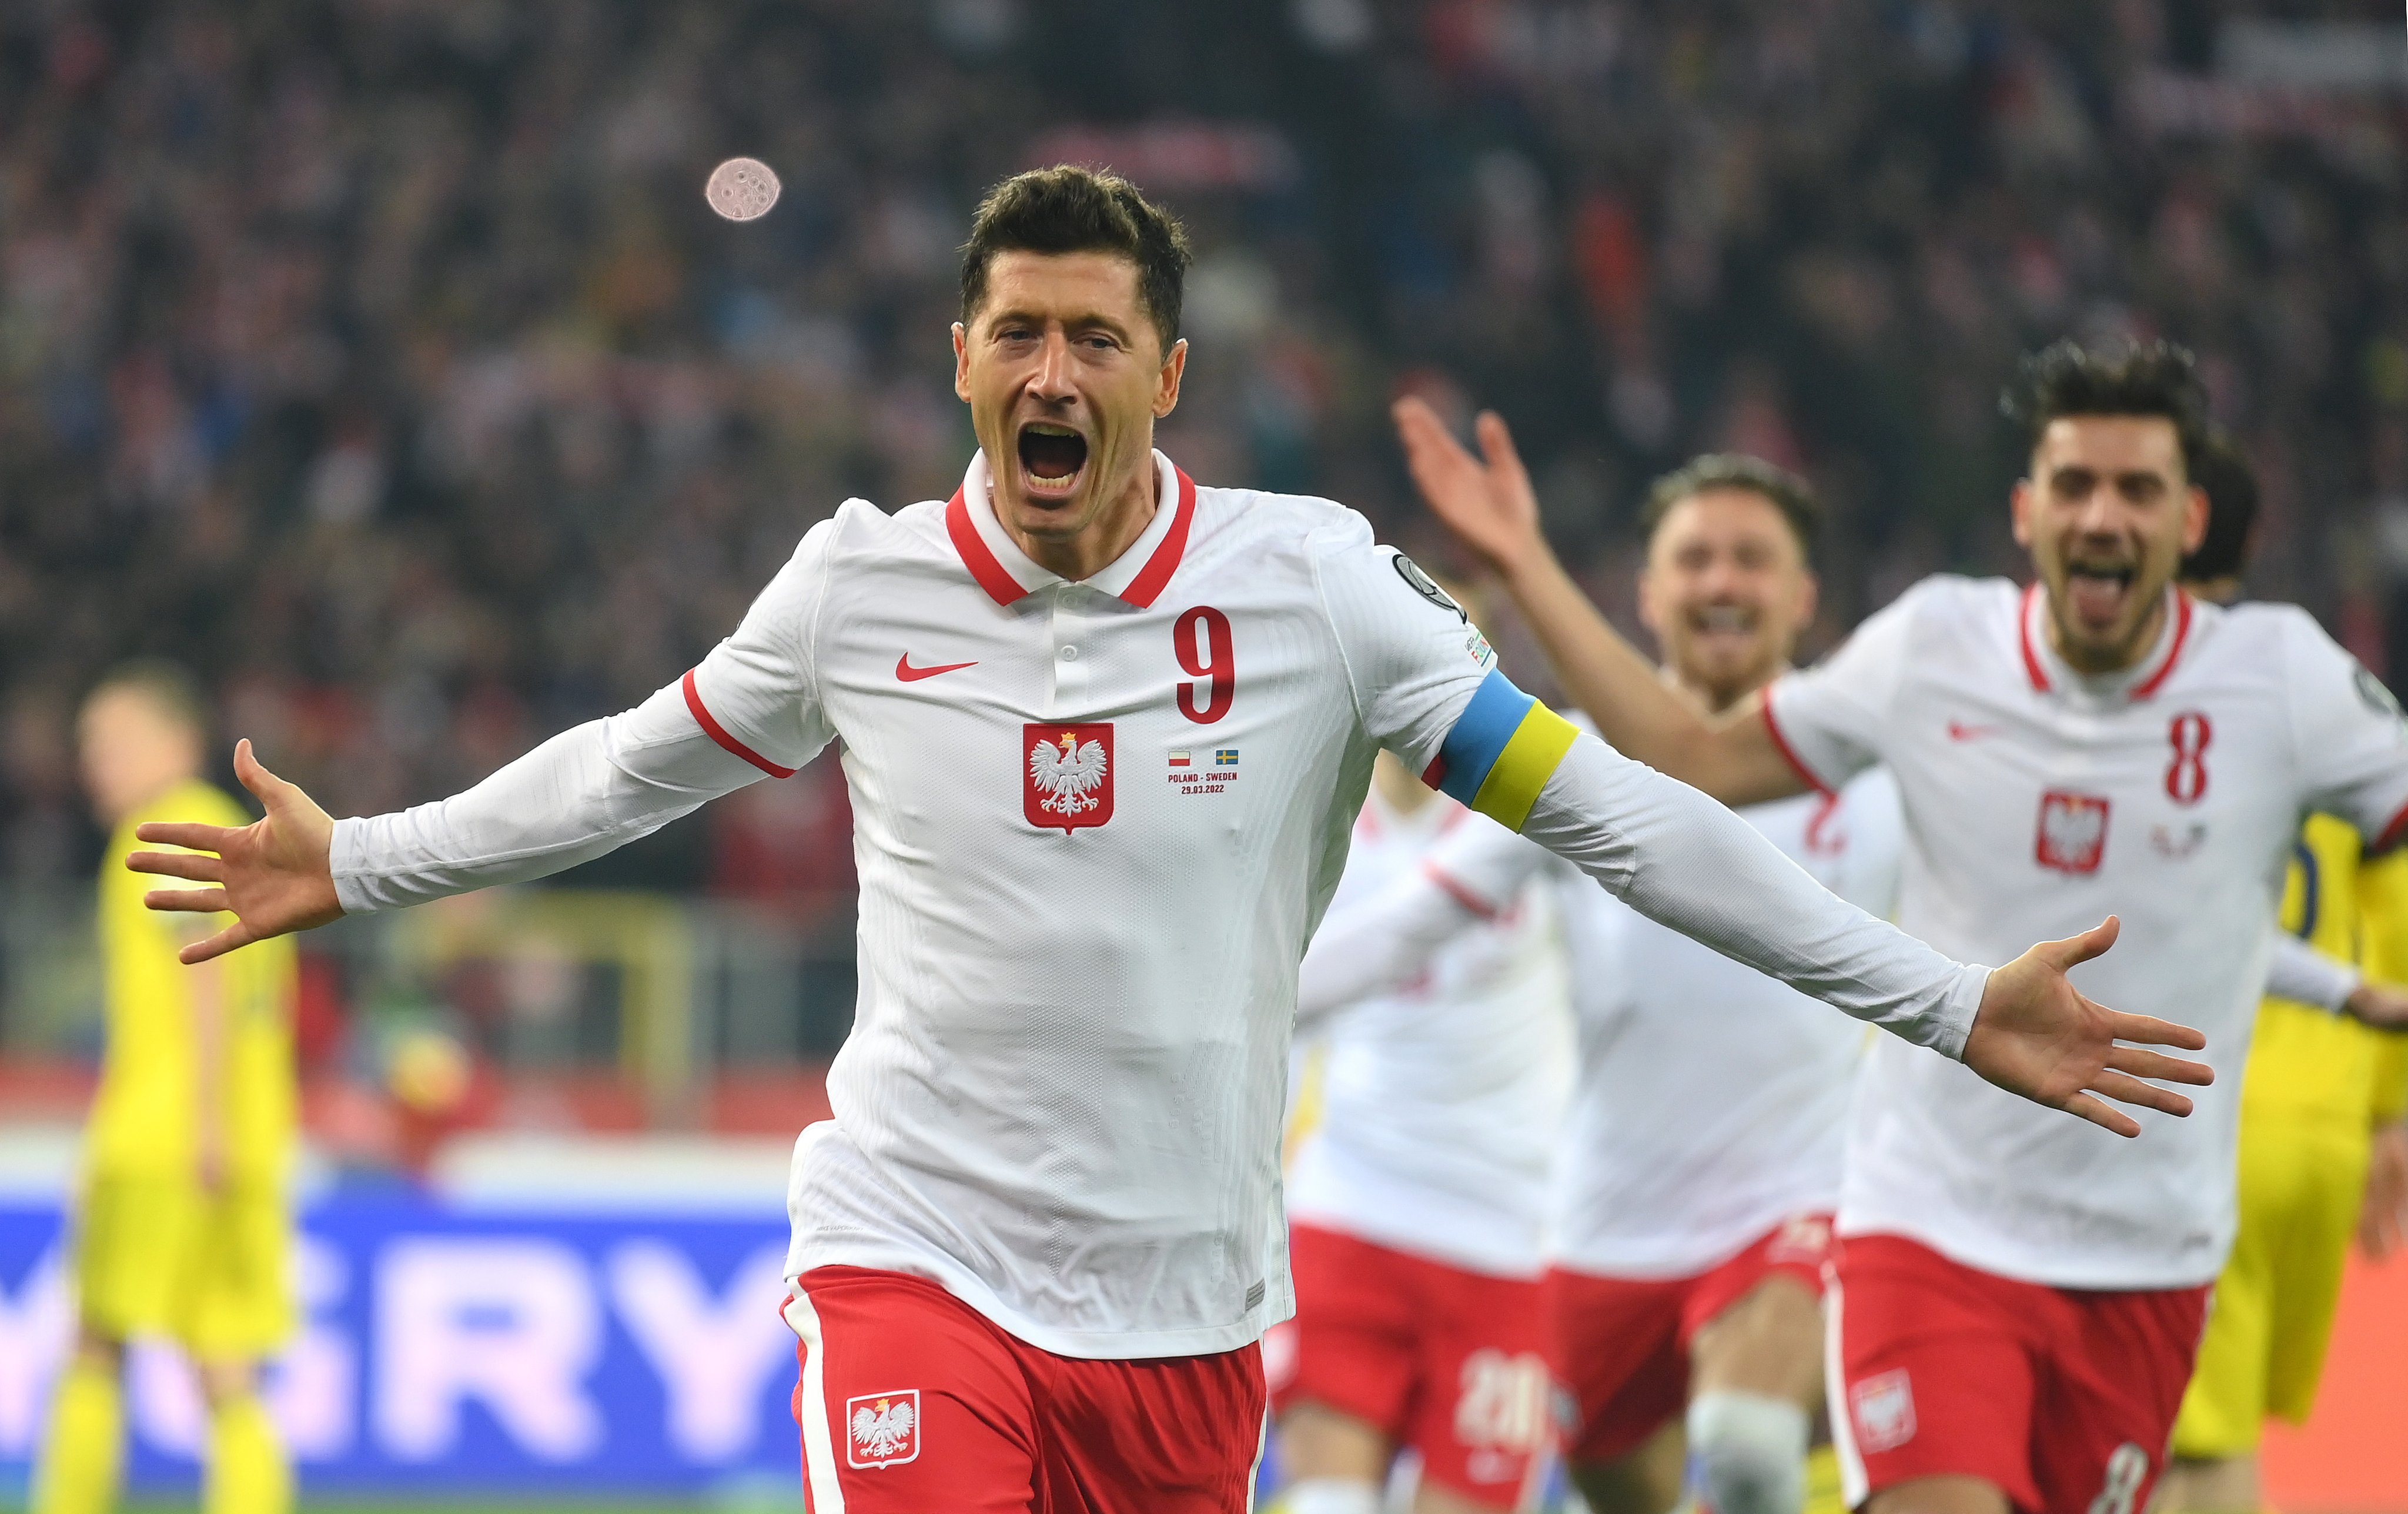 Poland 2-0 Sweden Highlights: Robert Lewandowski and Poland book their place in the FIFA World Cup as Ibrahimovic & Co. are KNOCKED OUT in a 2-0 defeat